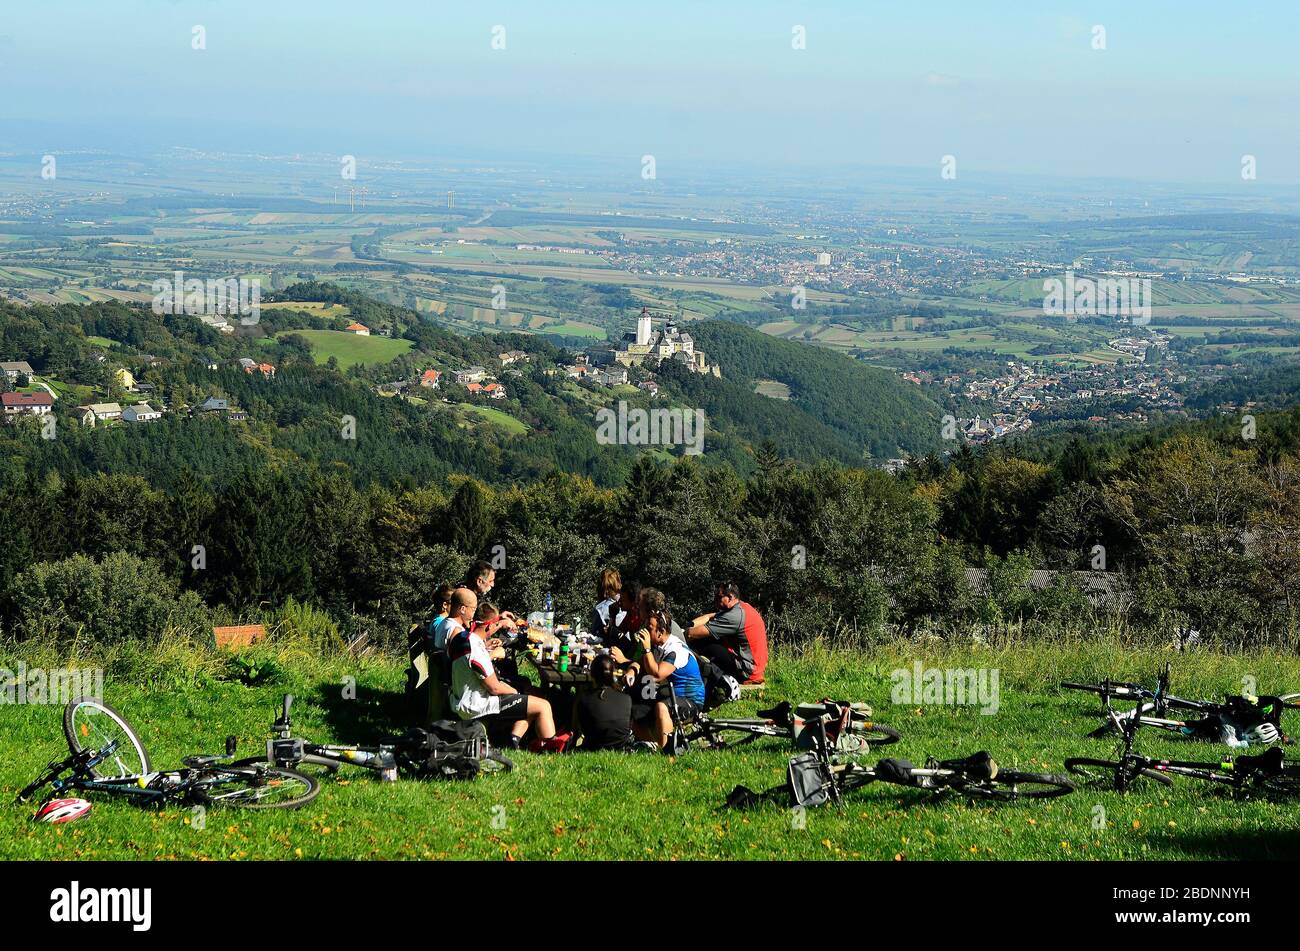 Forchtenstein, Austria - September 28, 2014: Group of unidentified cyclists rest in Rosalia mountains with view to village and castle Forchtenstein in Stock Photo